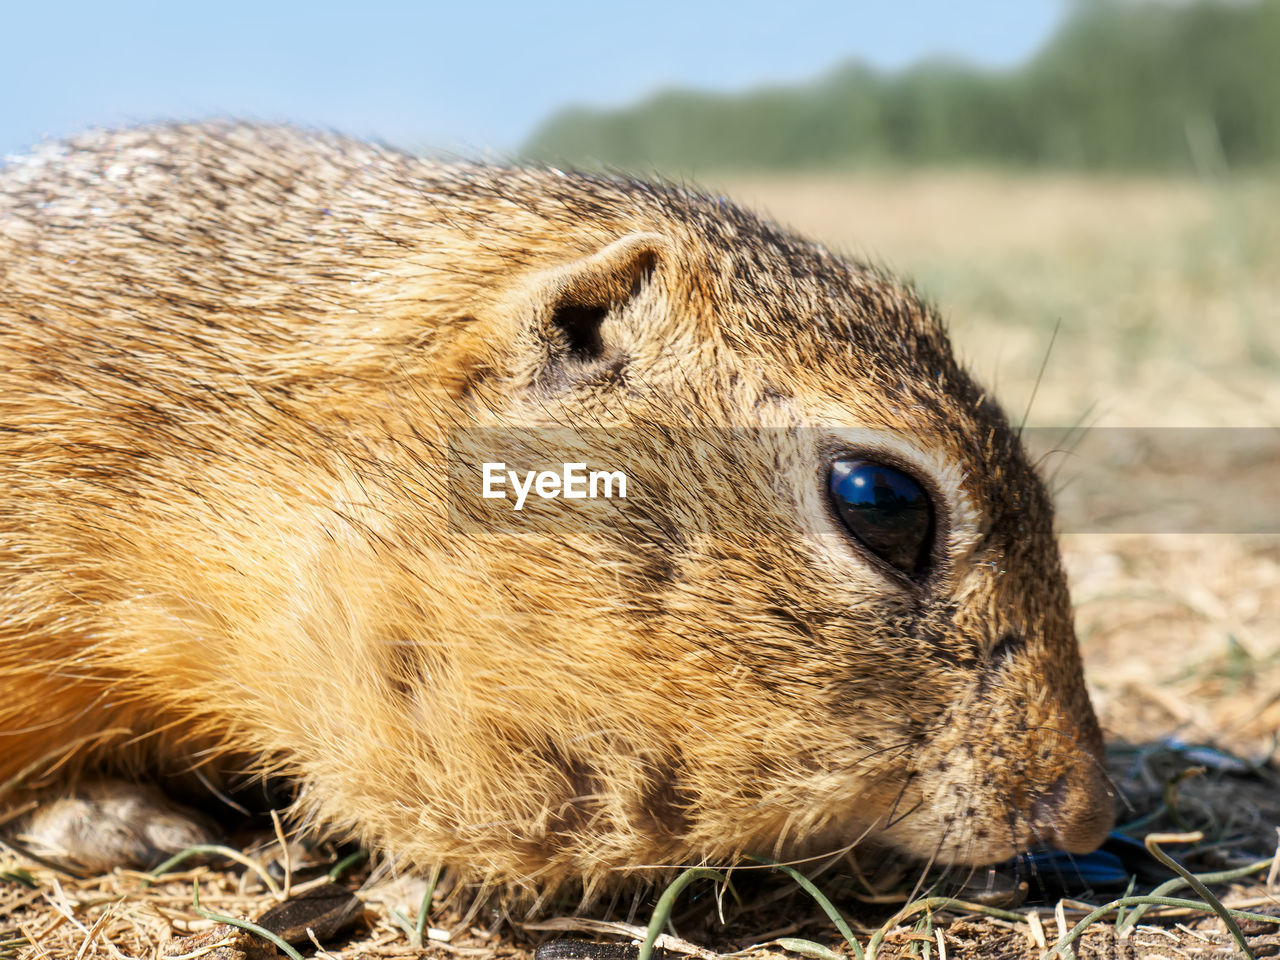 animal, animal themes, one animal, animal wildlife, wildlife, mammal, whiskers, nature, no people, rodent, close-up, animal body part, day, outdoors, portrait, prairie dog, side view, animal head, cute, grass